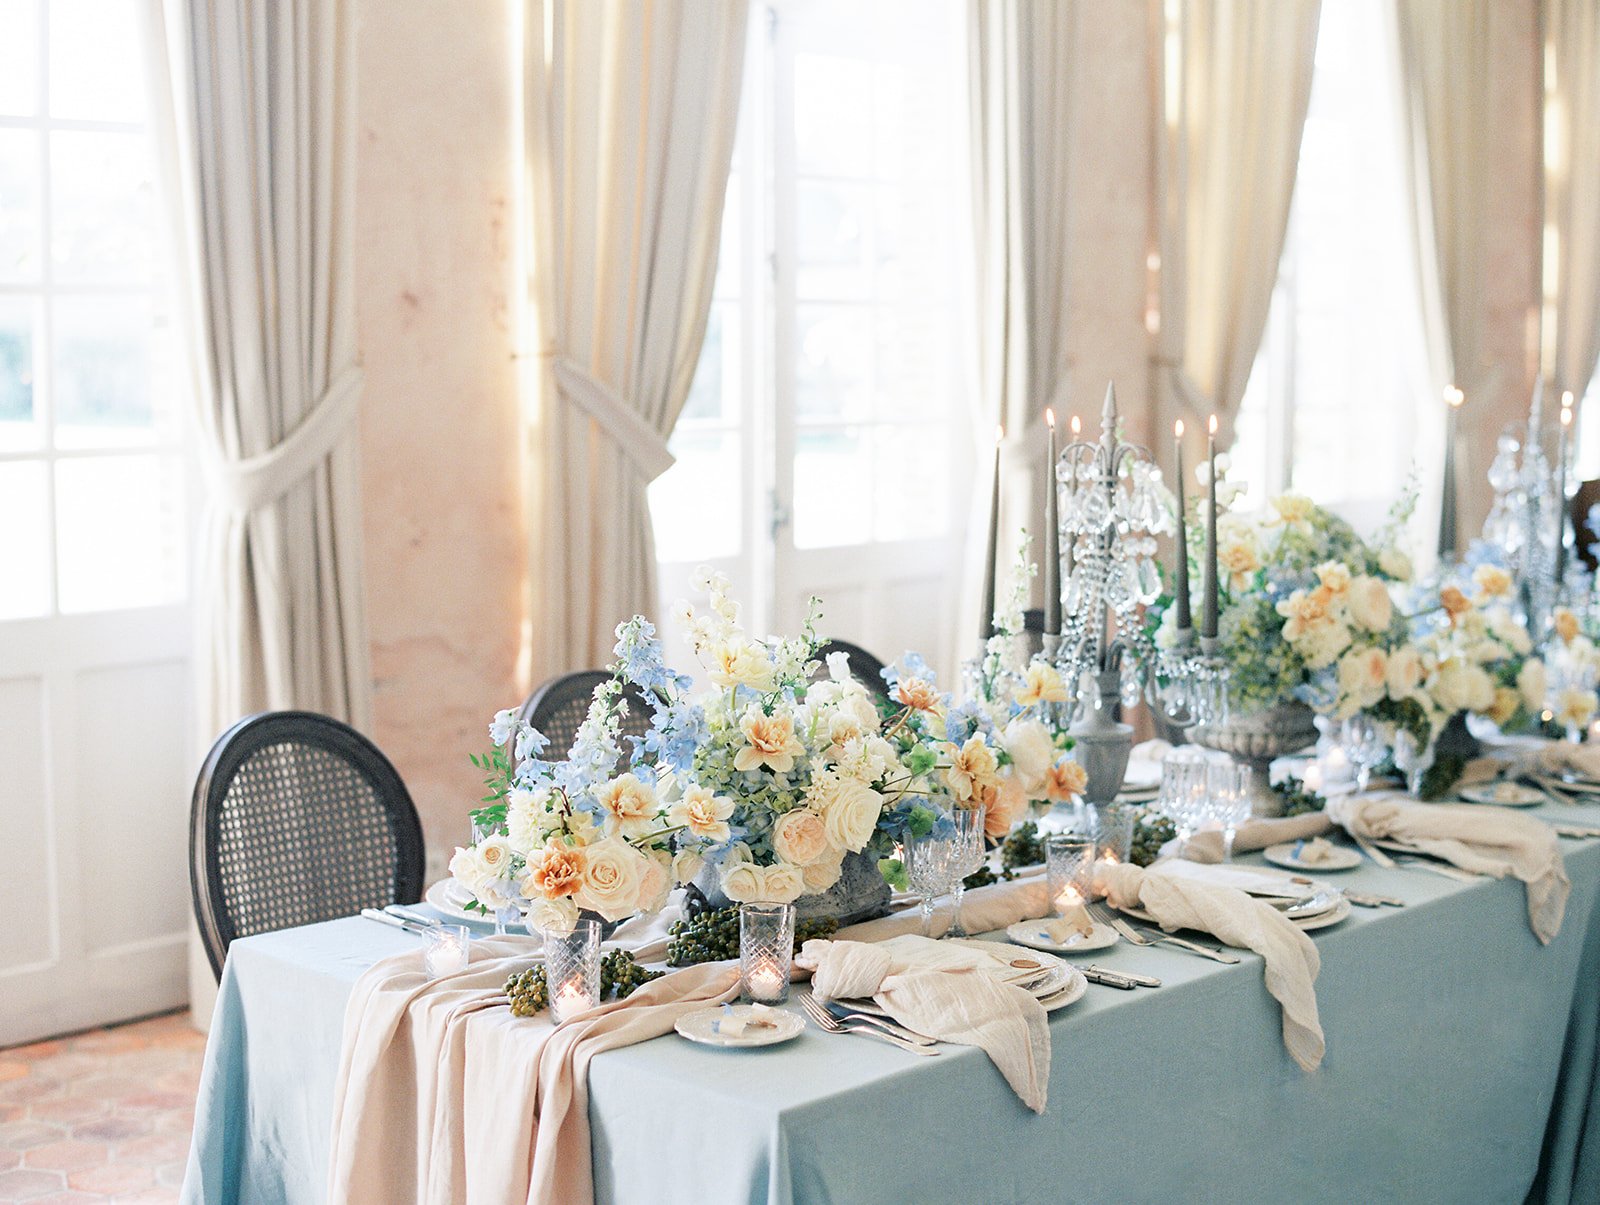 A blue and white table scape decorated with pastel flowers and a candelabra in the Orangerie  at a French chateau near Paris.